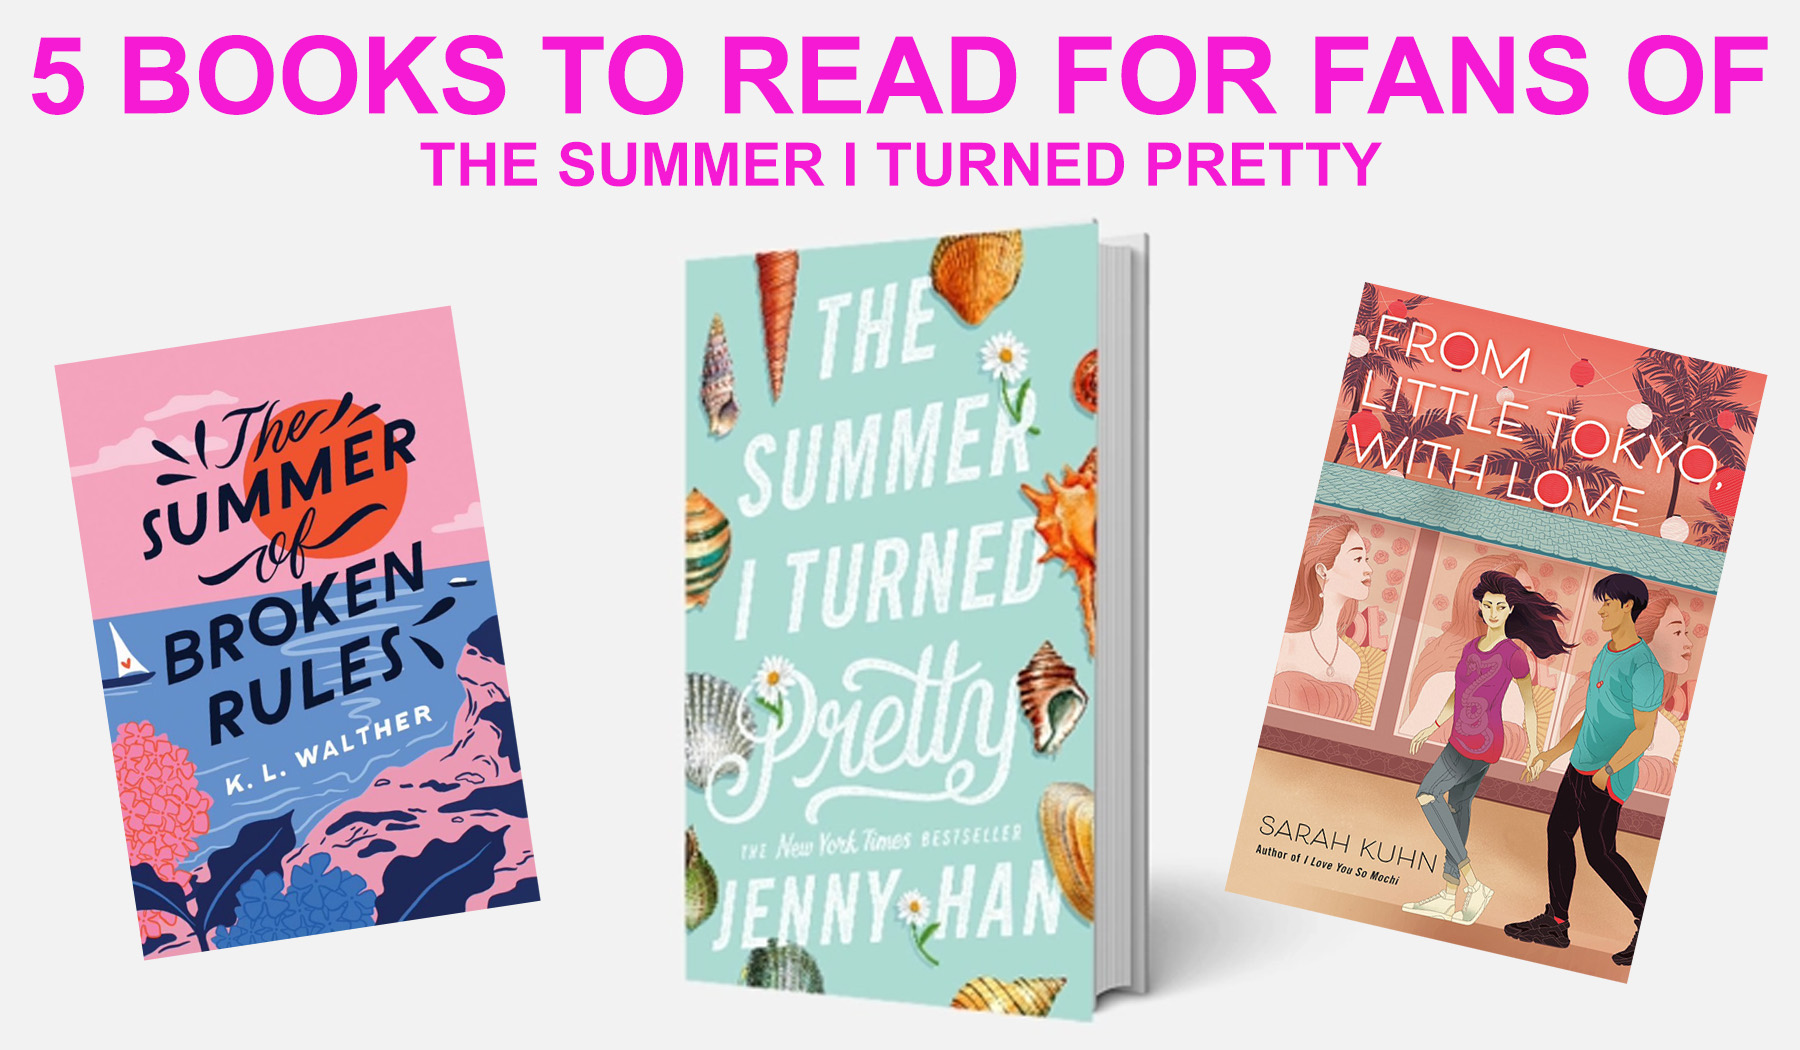 5 Books To Read For Fans Of The Summer I Turned Pretty